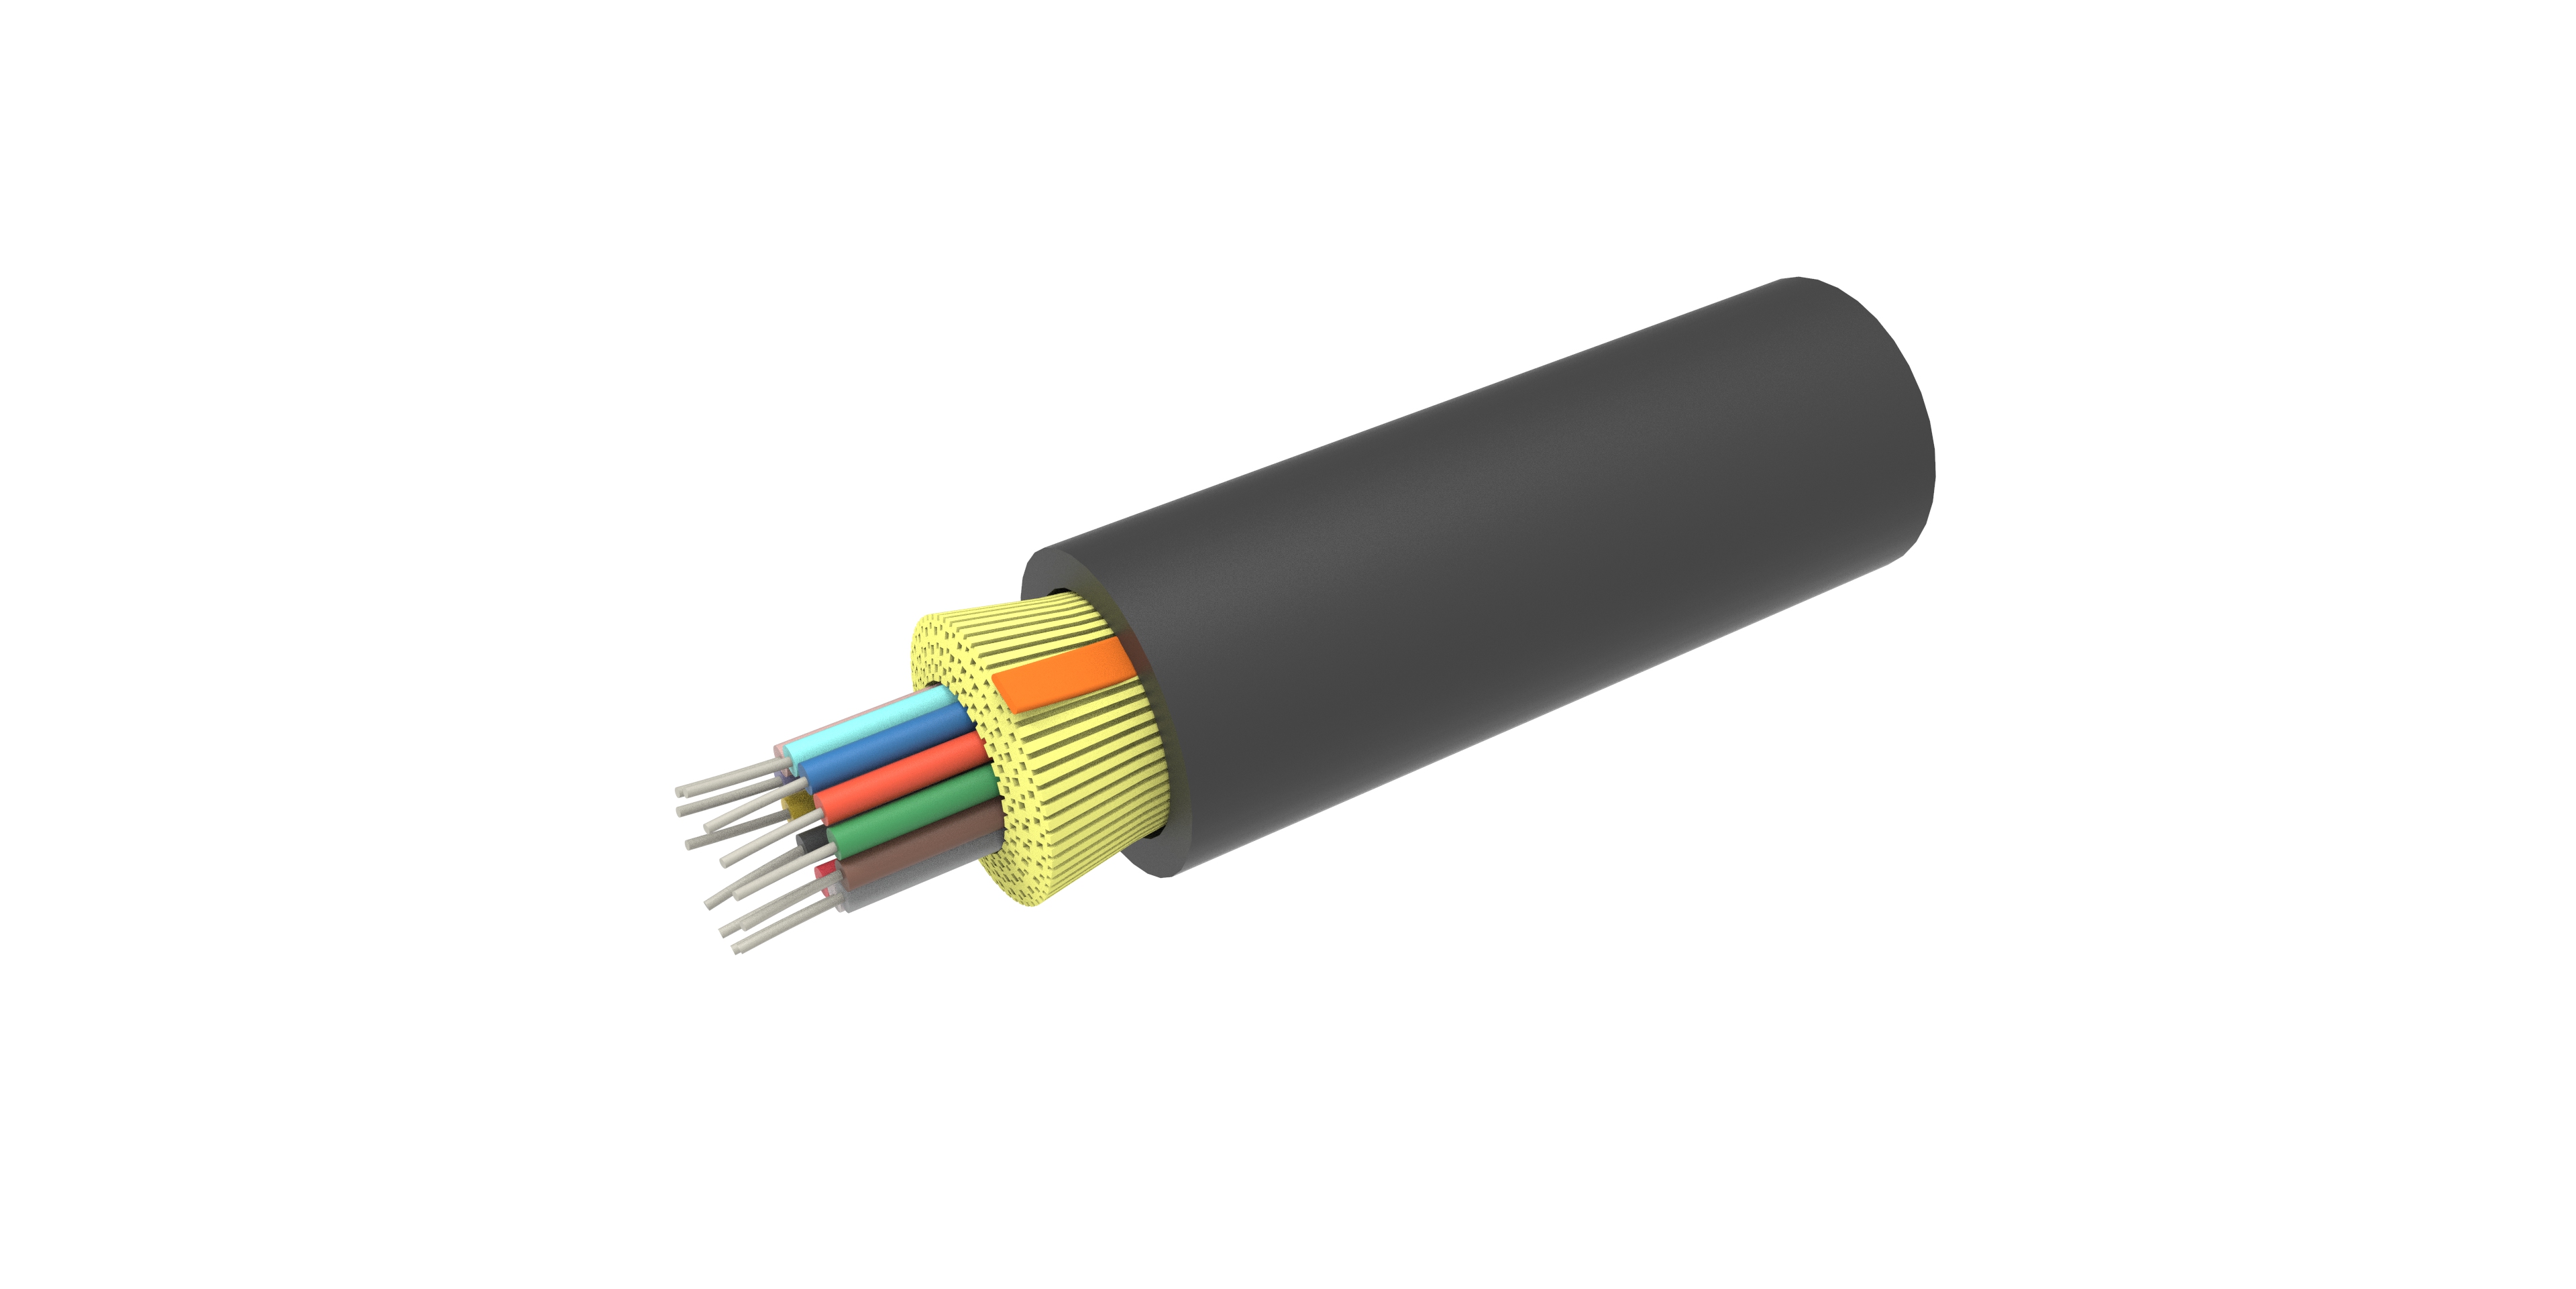 Acome Acoptic UNB1627 Indoor/Outdoor Strippable Overhead/Underground Fiber Optic Drop Black Cable 500m/1640ft